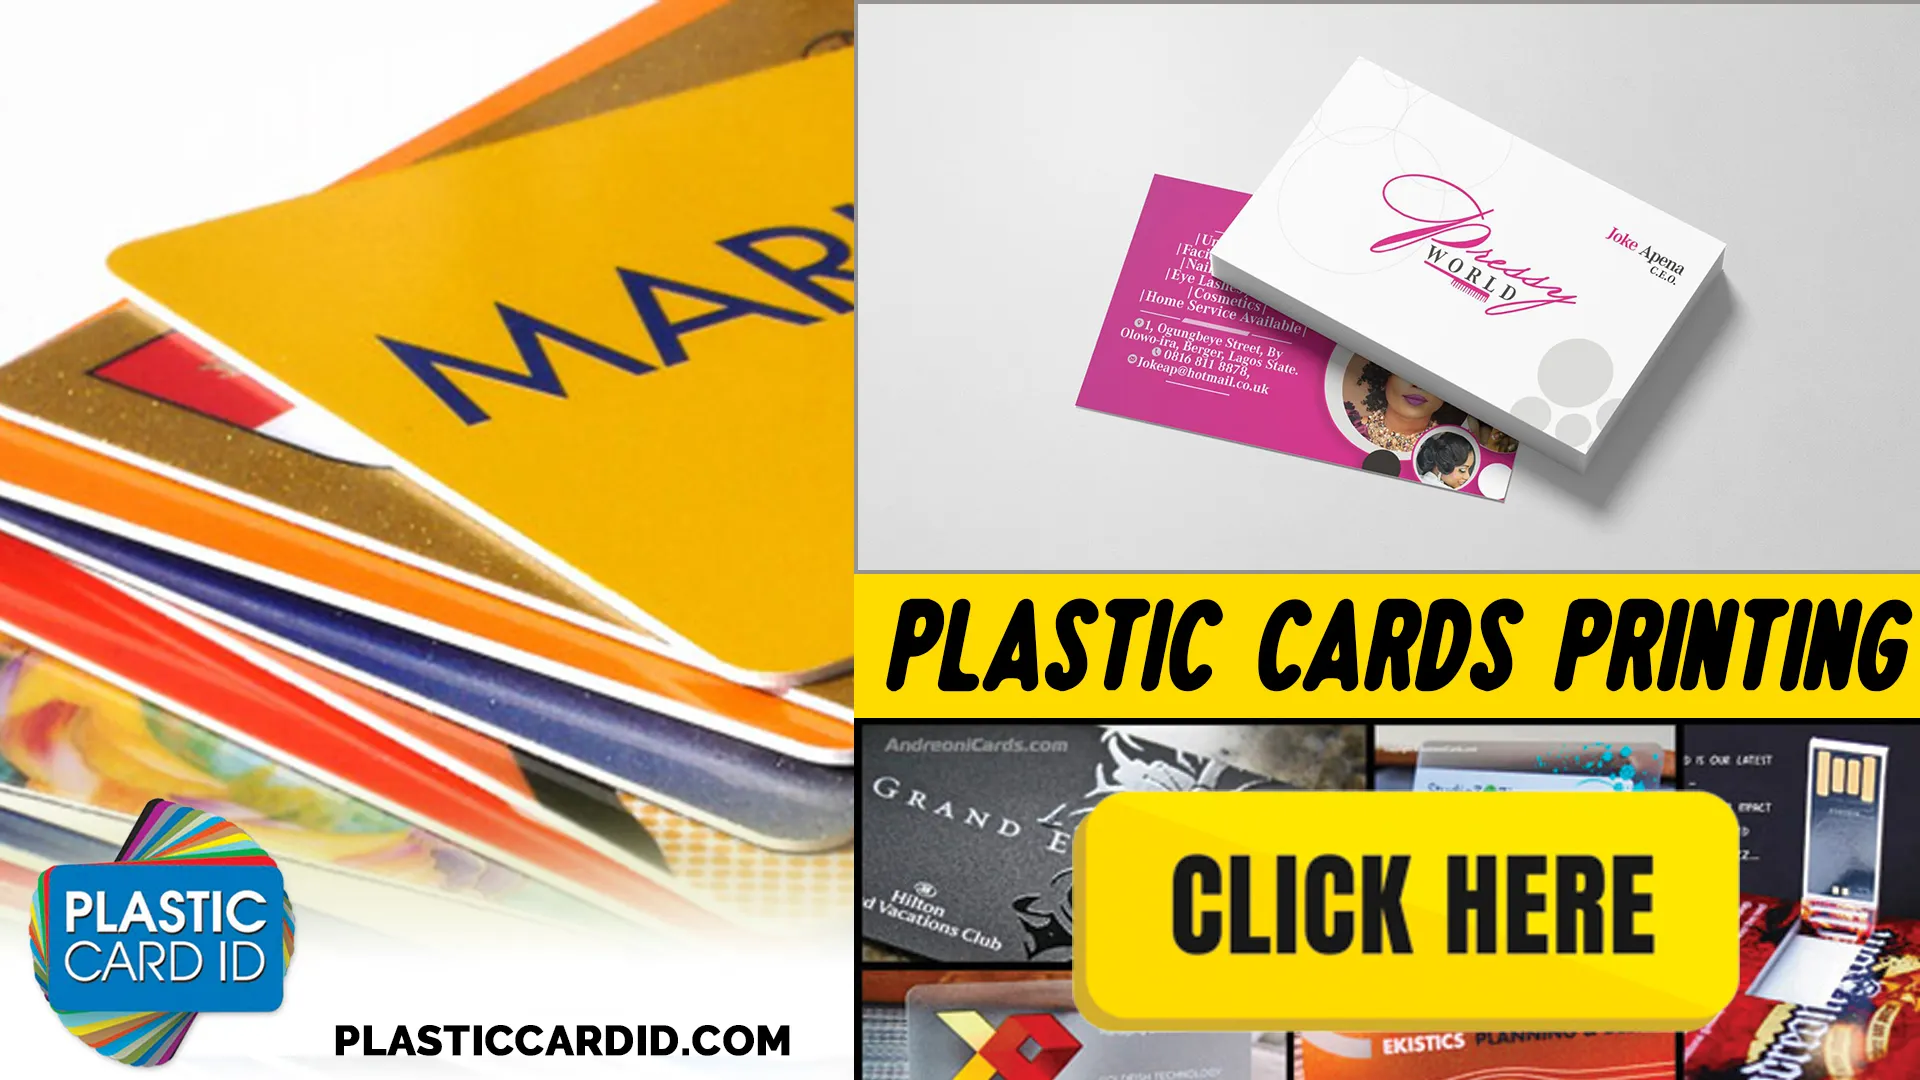 Enhancing Client Relationships with High-Quality Plastic Cards